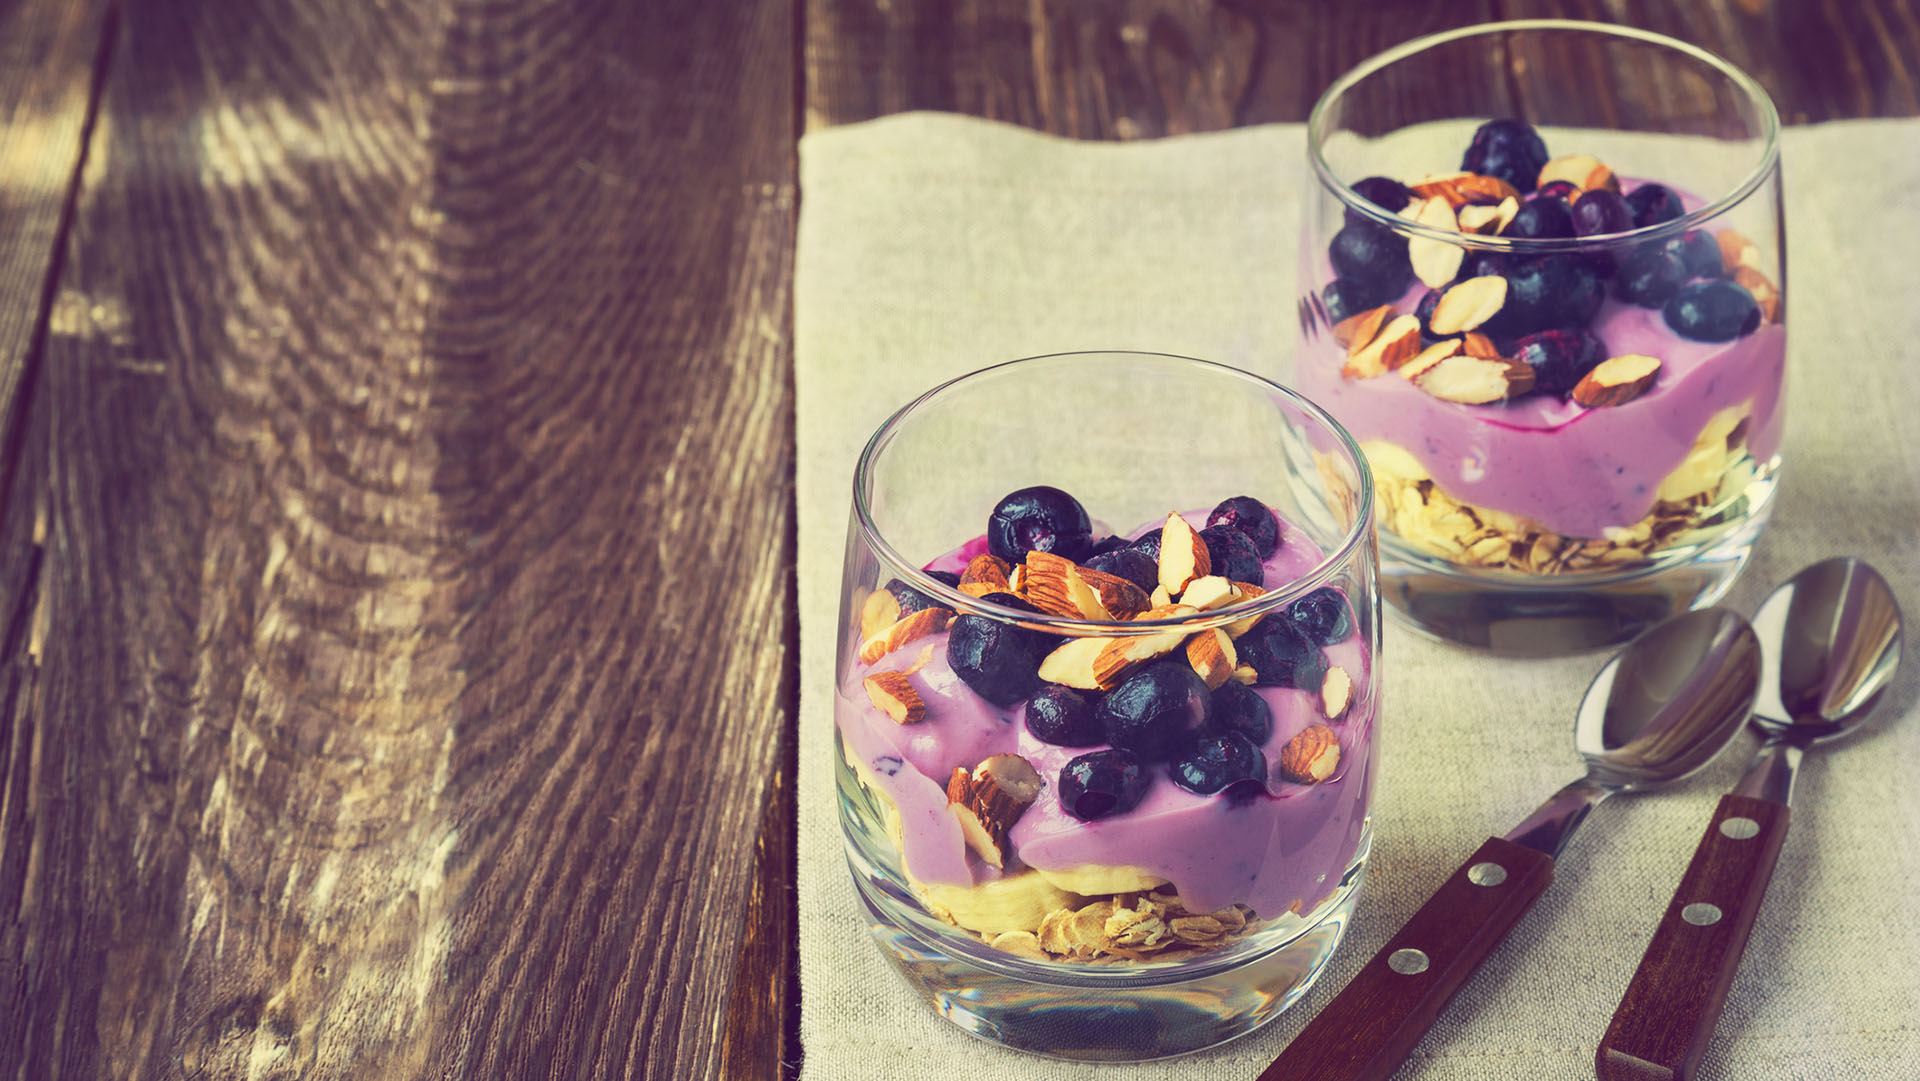 Dessert of oatmeal, banana, yogurt, blueberries and almond in glass bowls on rustic wooden background. Vintage toned picture.